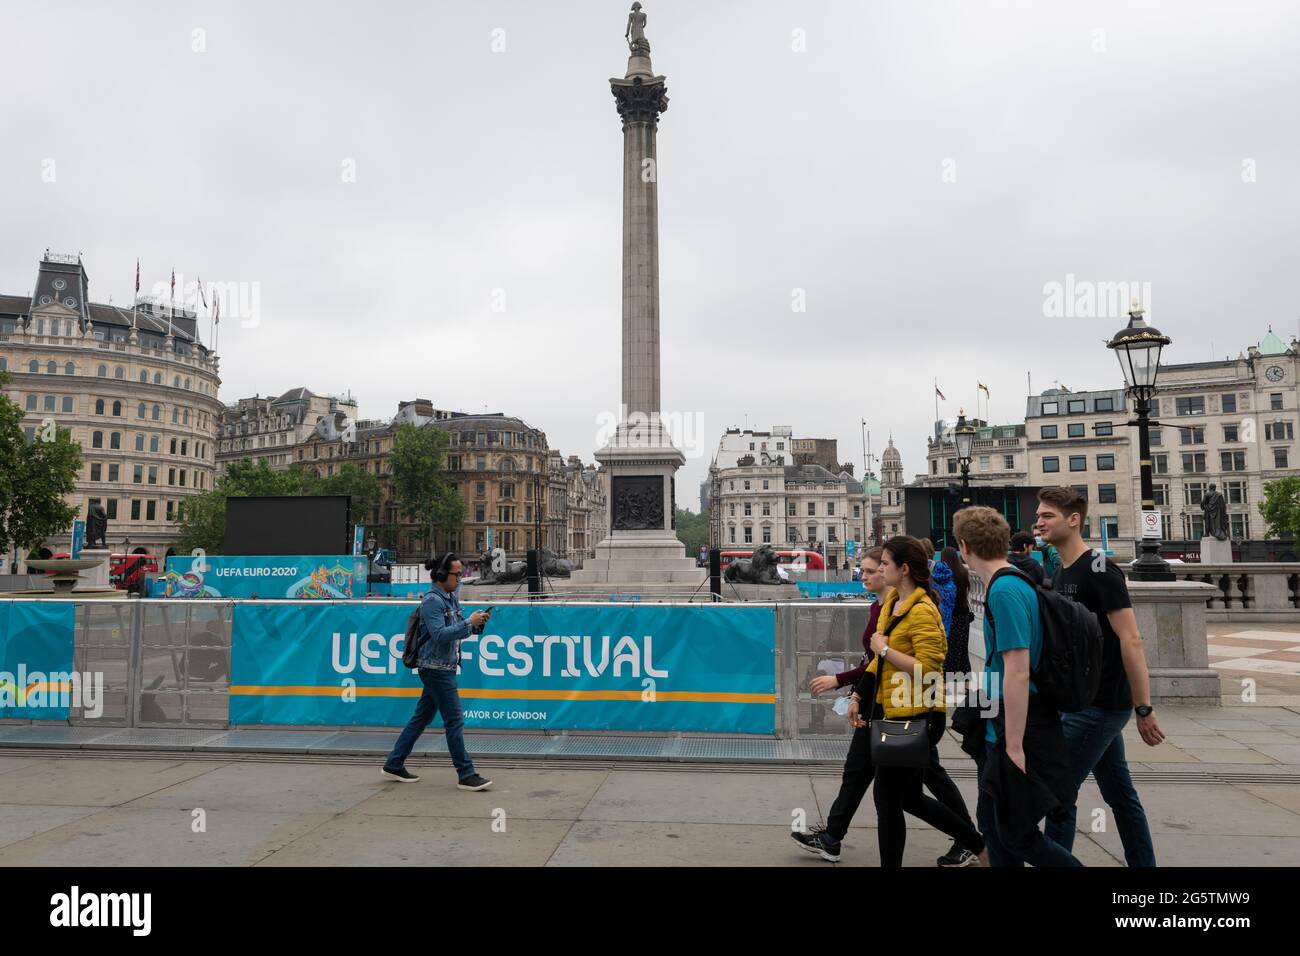 London. UK- 06.27.2021: banners signs in Trafalgar Square for the UEFA Festival, hosting outdoor viewing for the EURO 2020 football Stock Photo